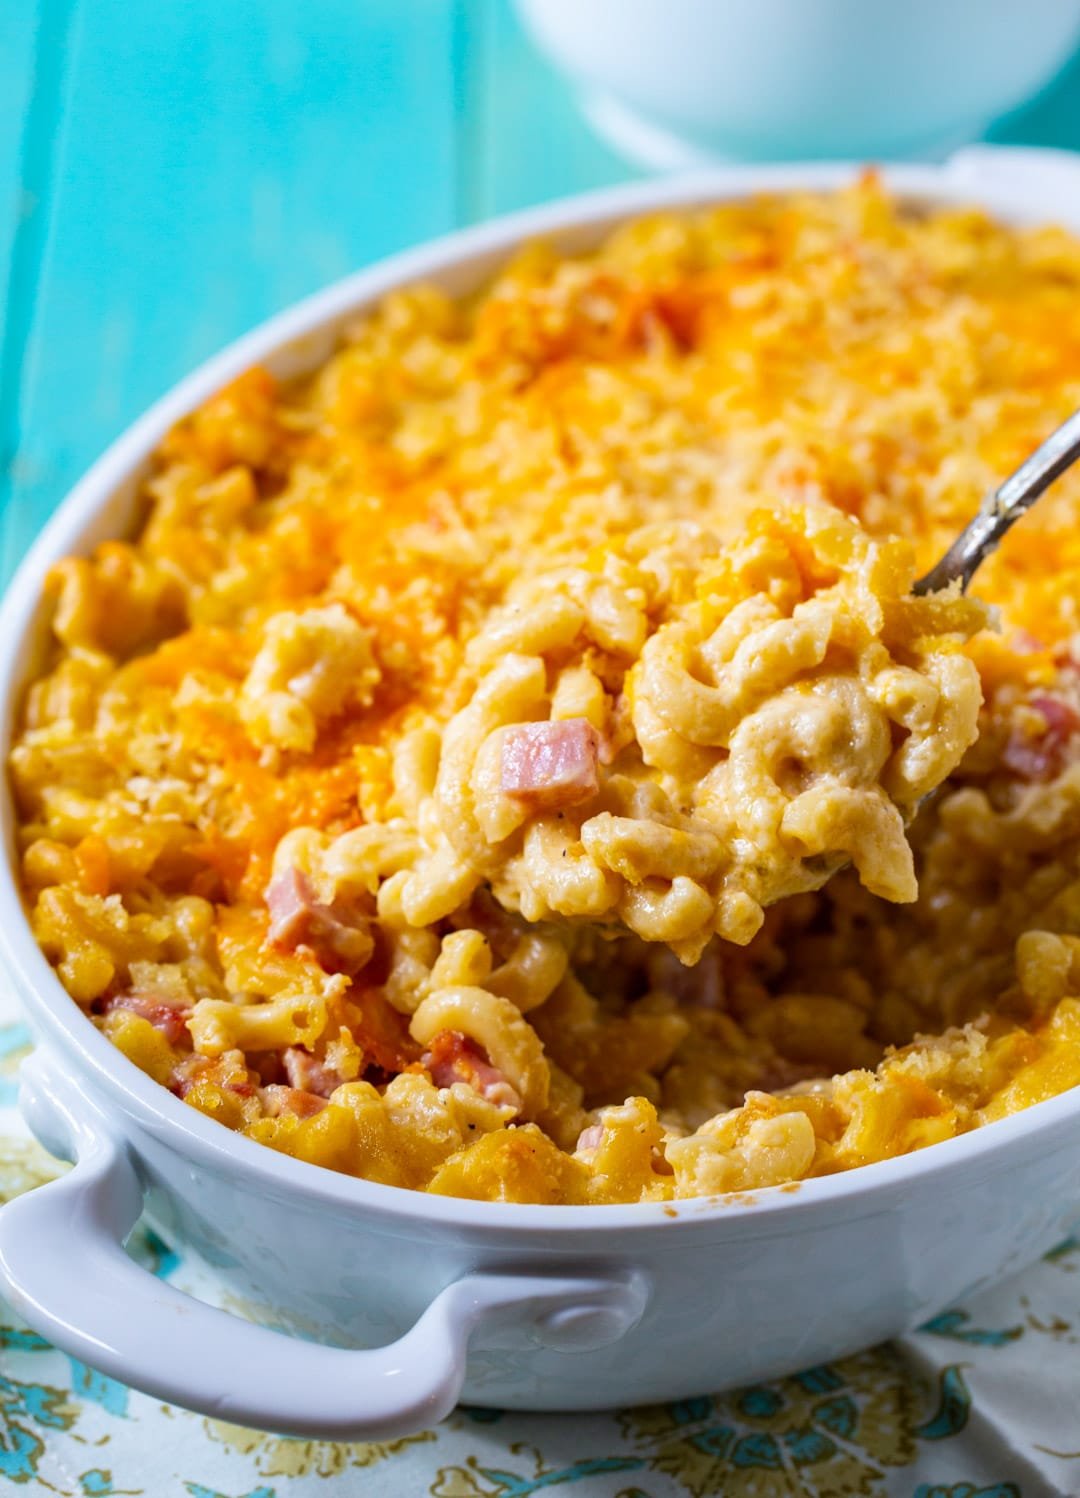 Spoon scooping up Mac and Cheese with Ham.